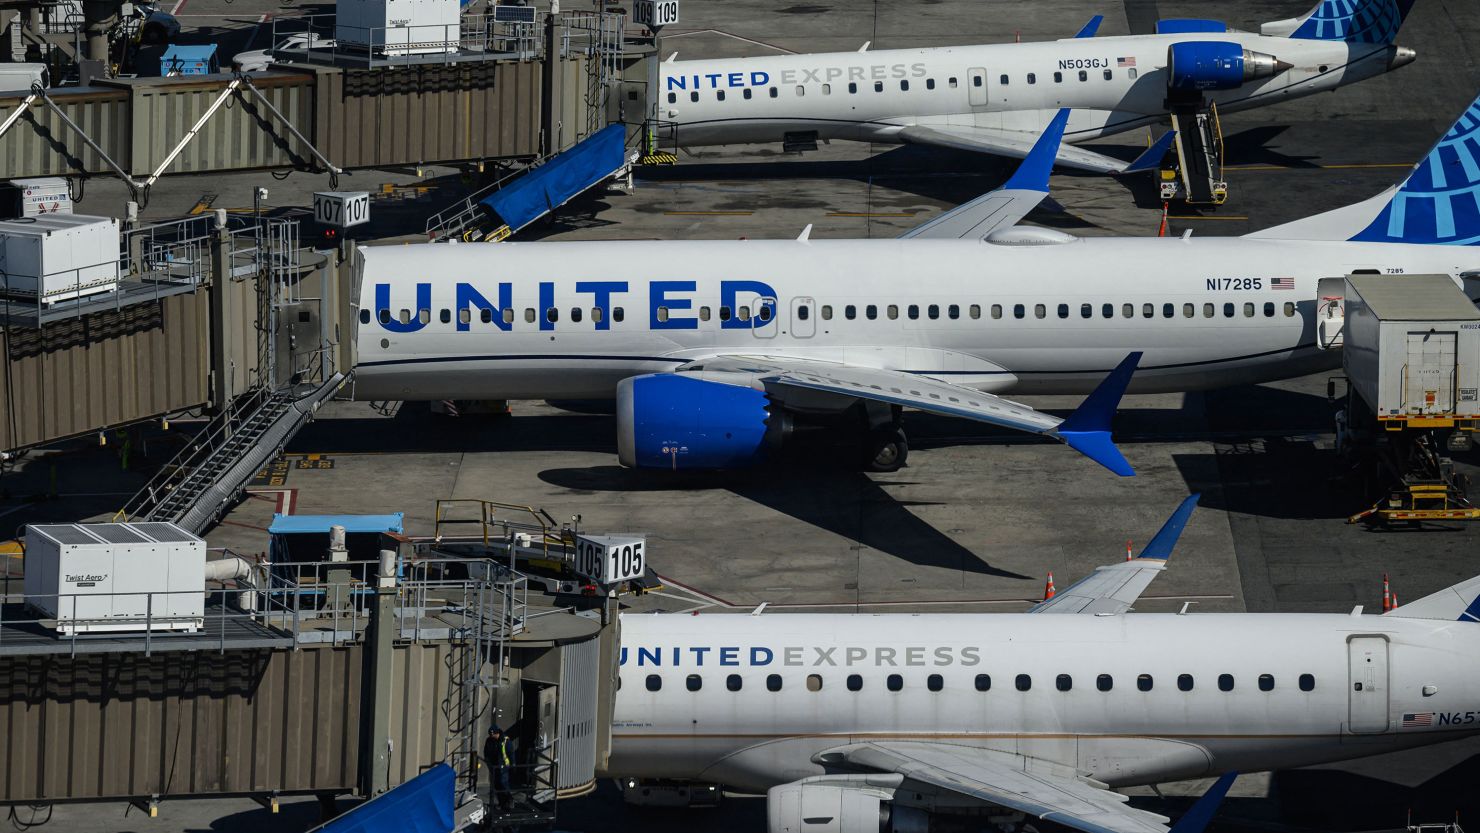 United Airlines aircraft are parked at Newark Liberty International Airport in Newark, New Jersey, on March 9, 2023.